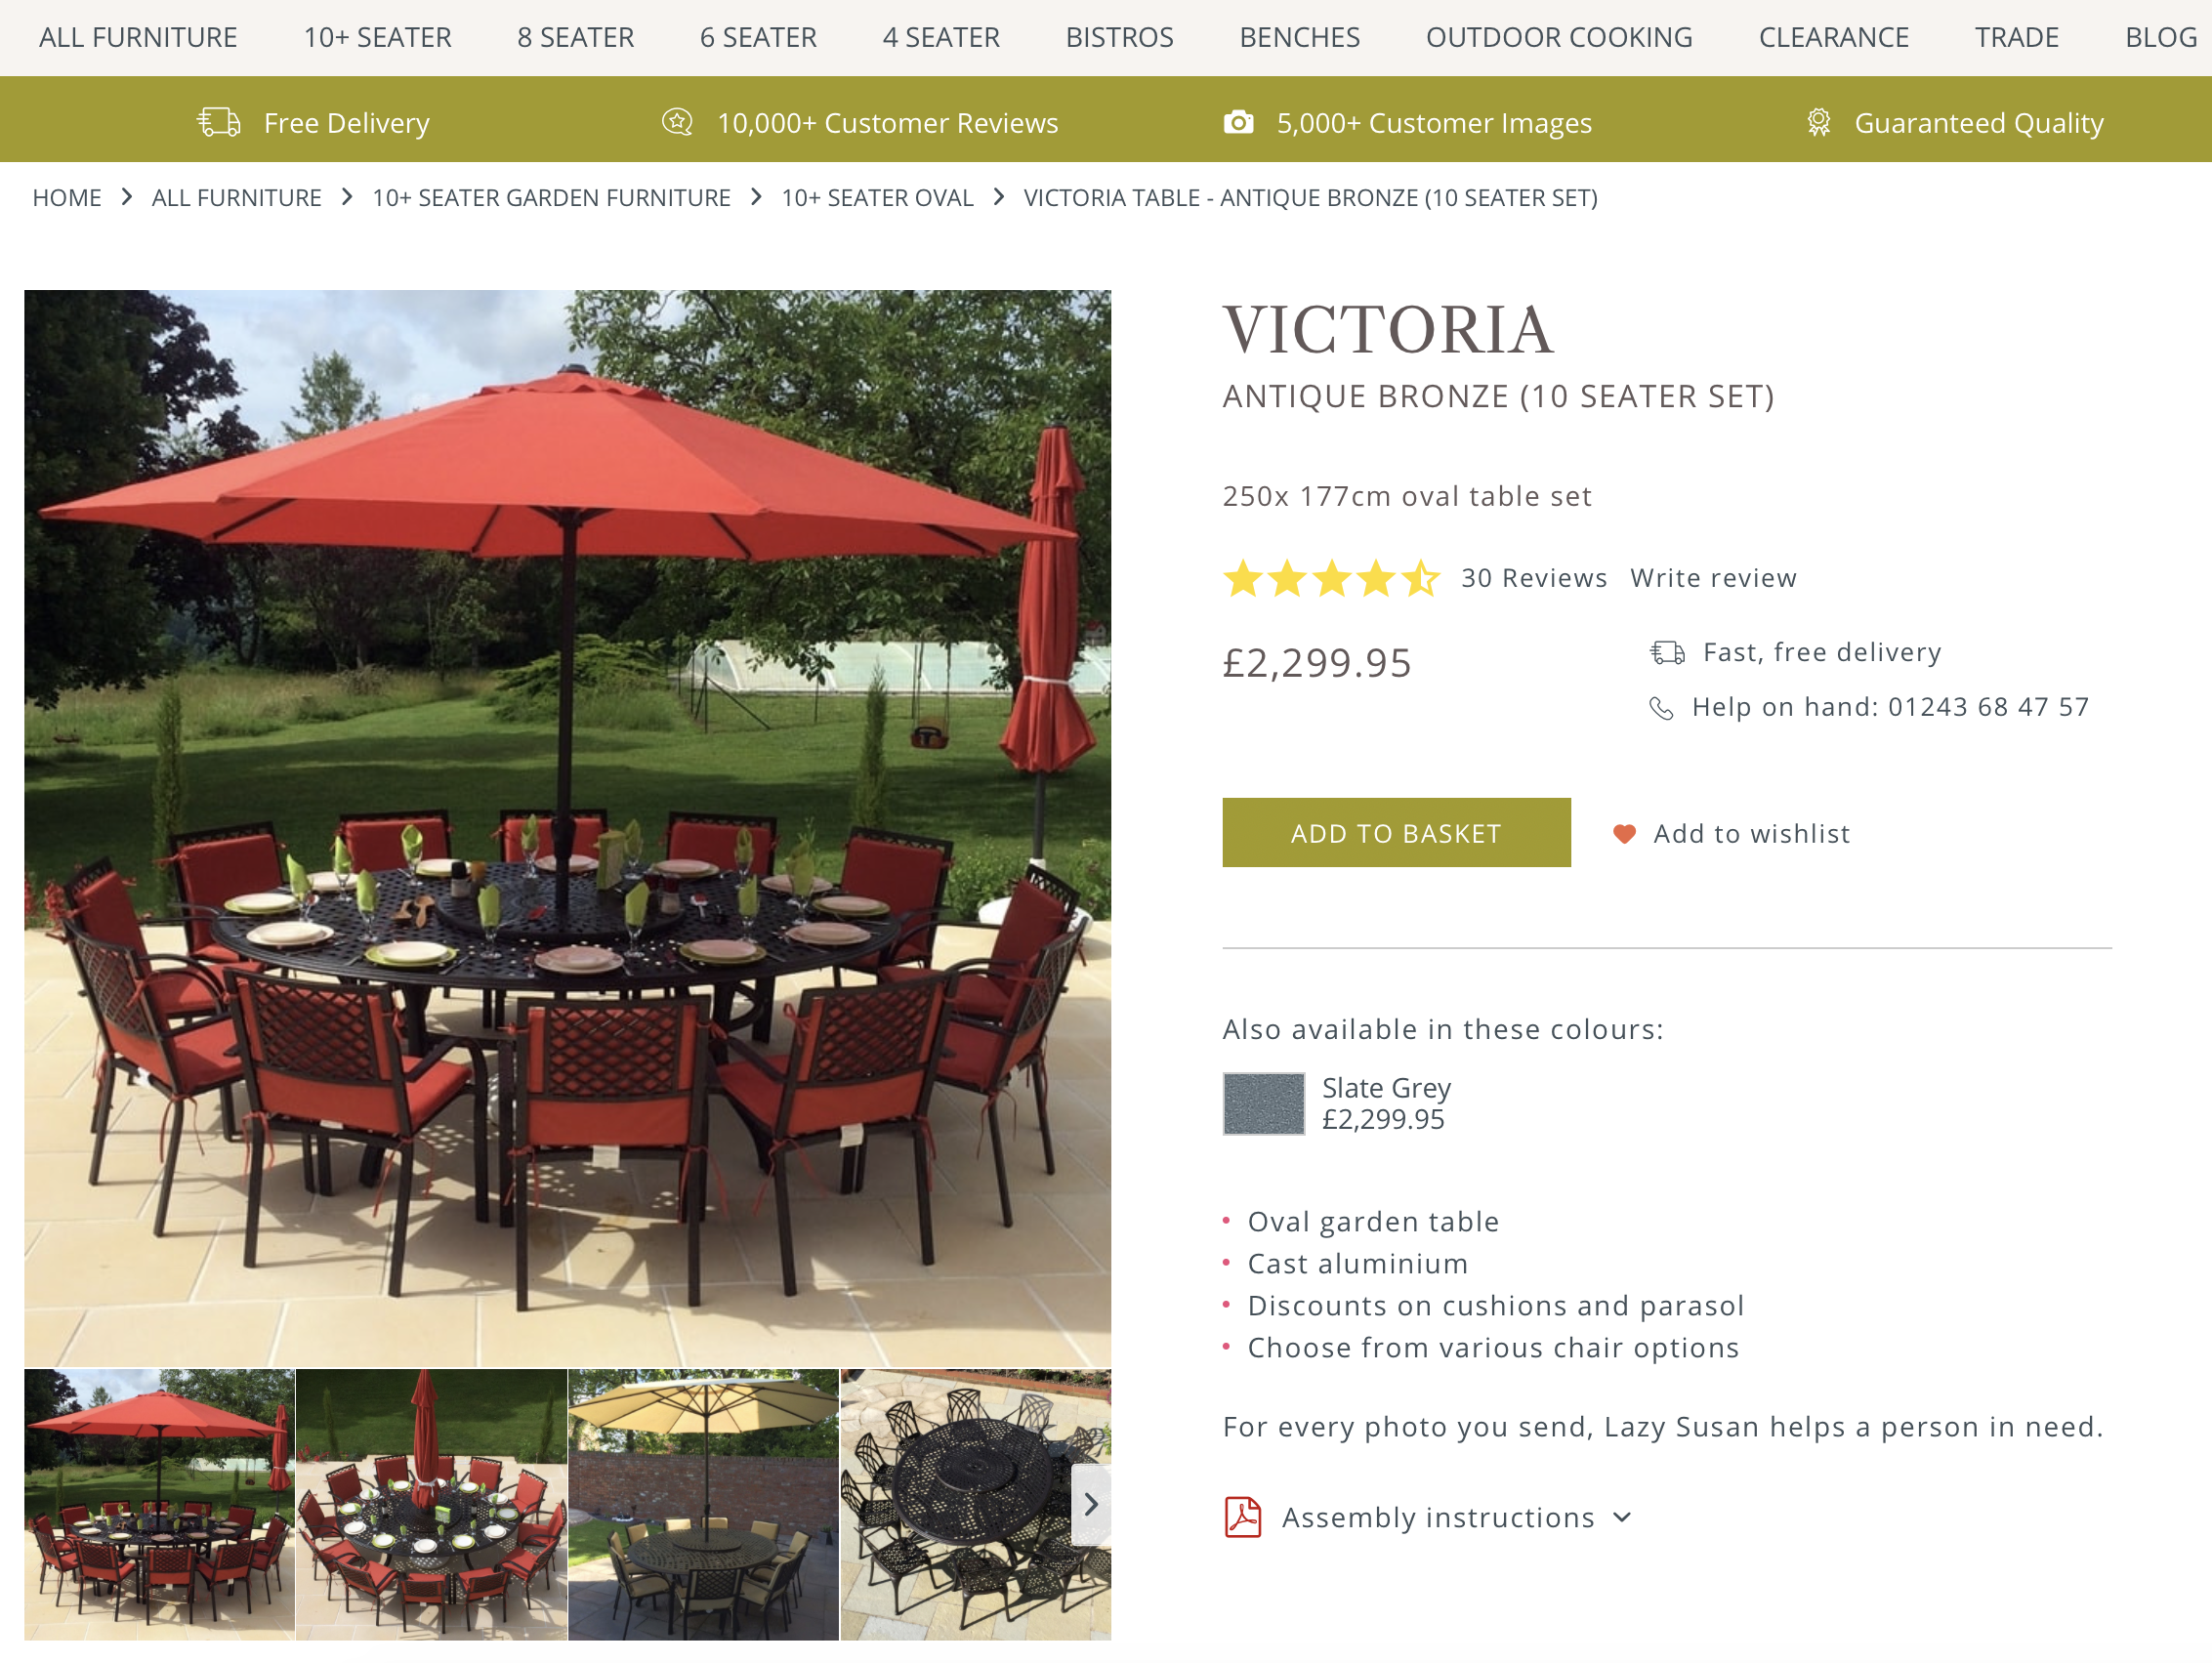 Victoria Garden Furniture Set Product Page